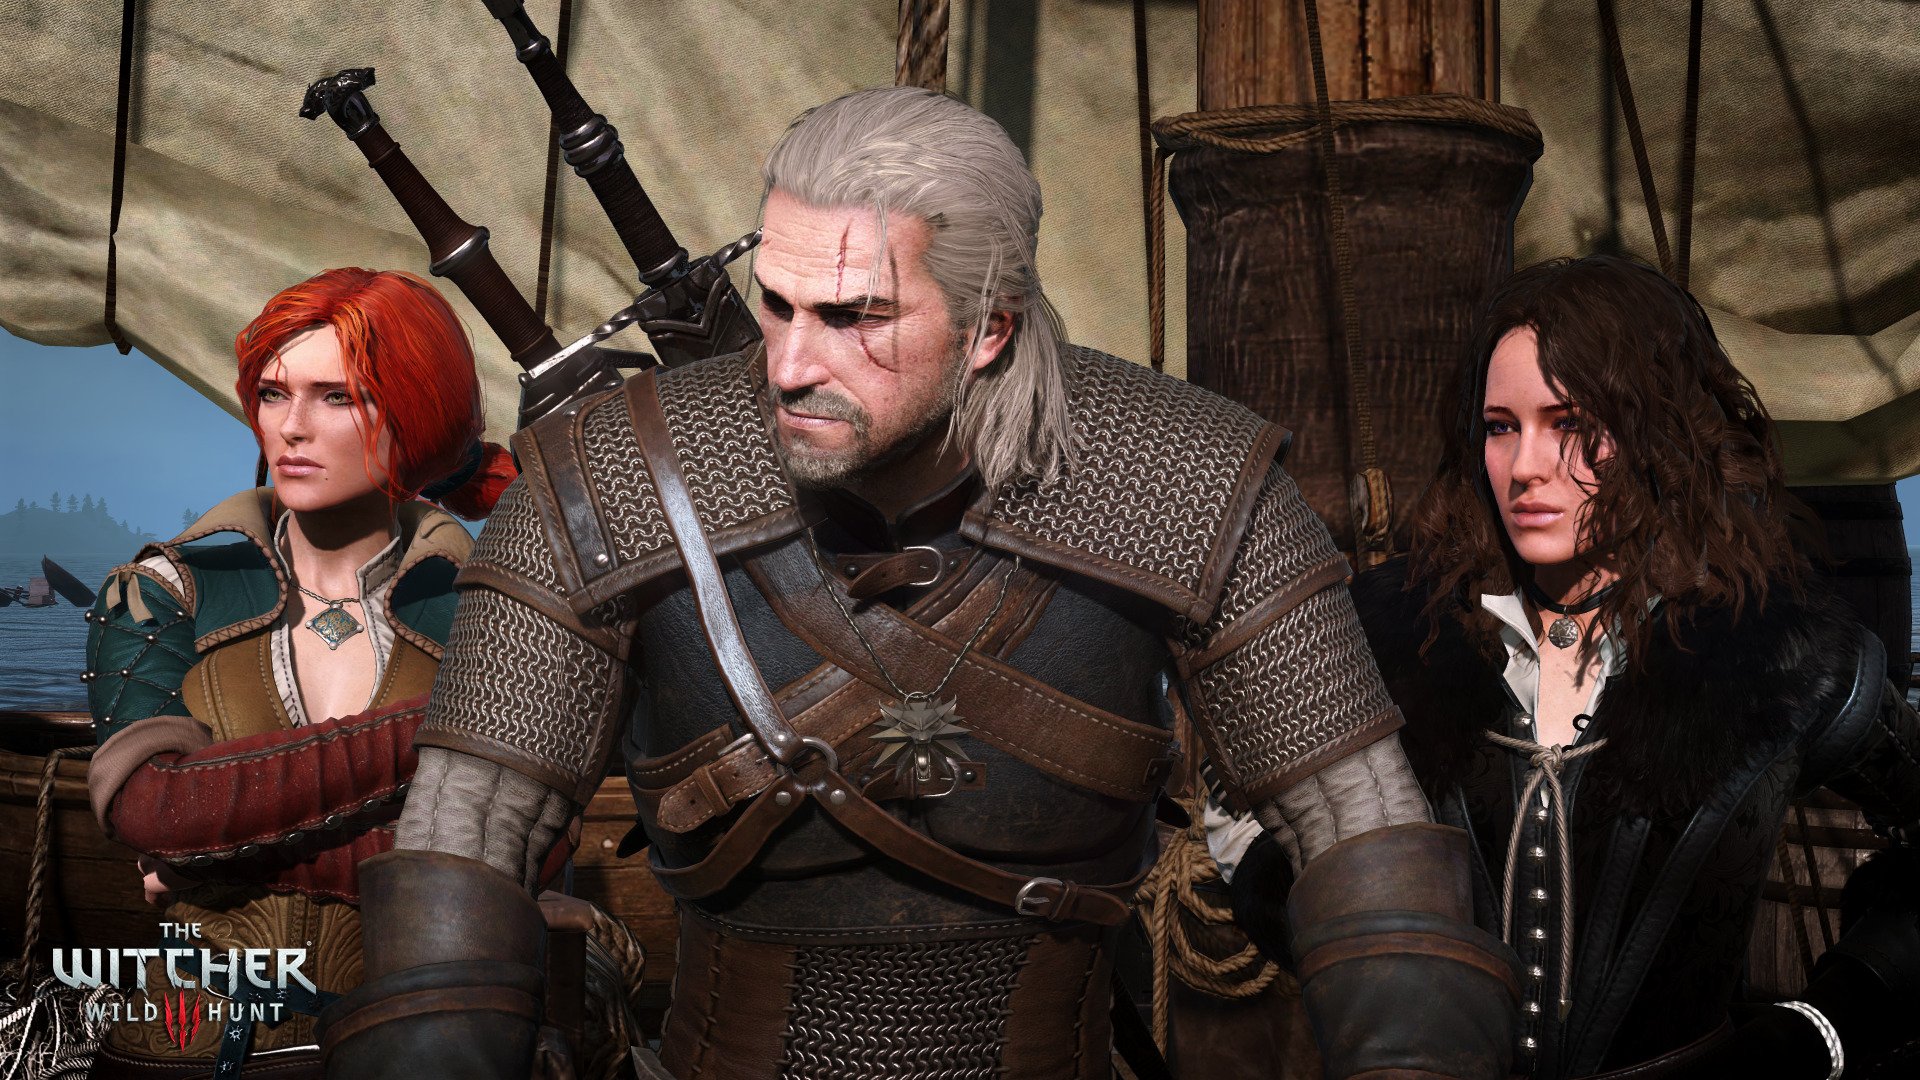 the witcher, video game, the witcher 3: wild hunt, geralt of rivia, triss merigold, yennefer of vengerberg